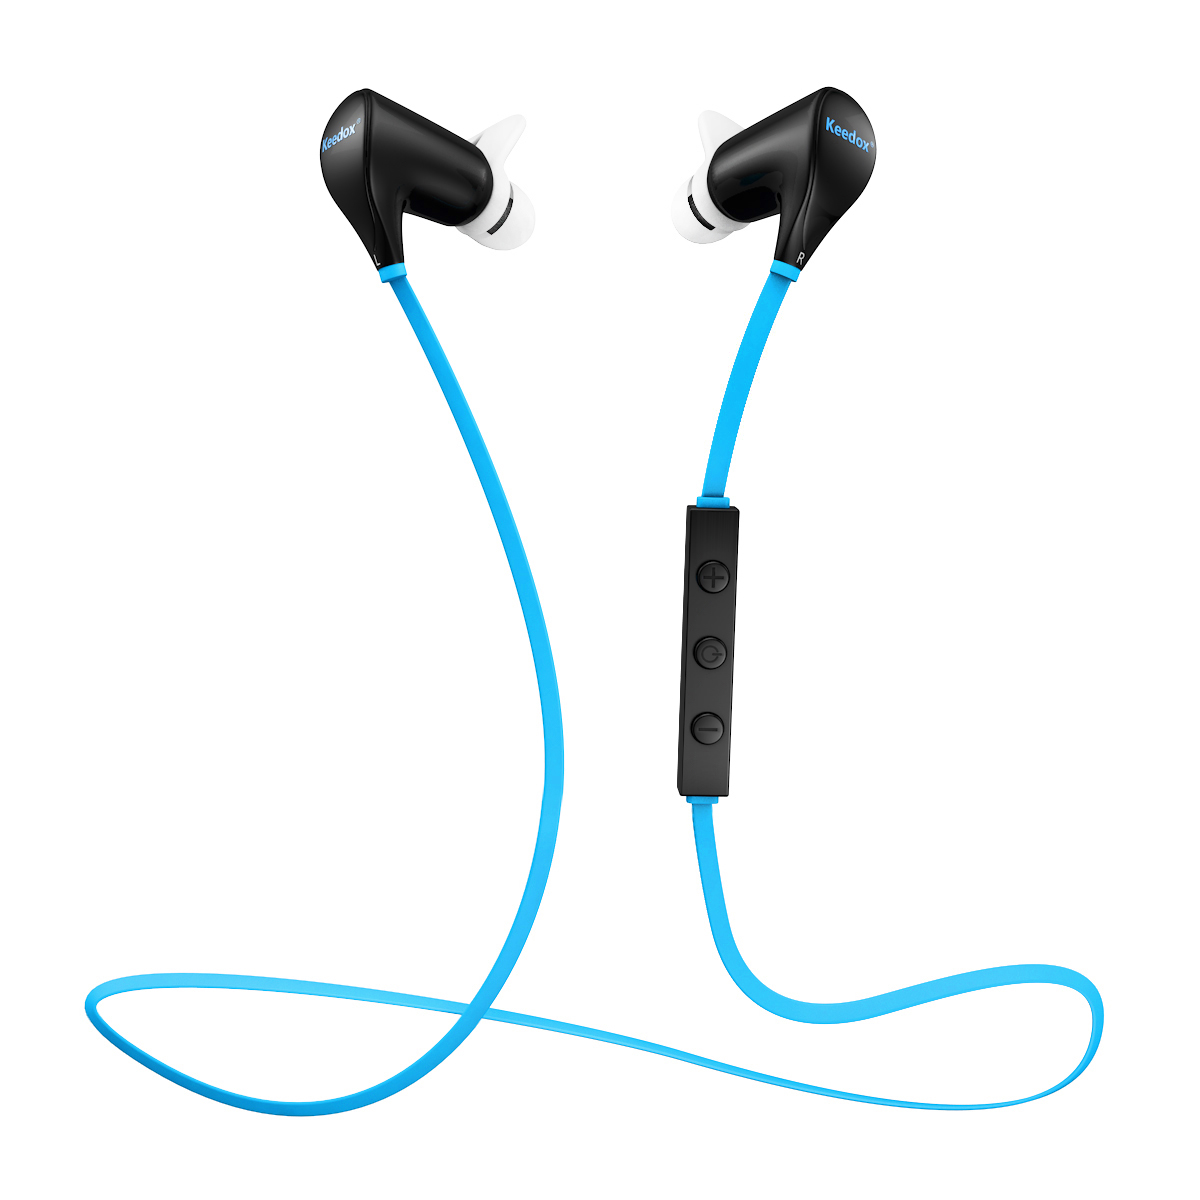 Keedox Wireless Earbuds Bluetooth 4.1 Stereo Headset Noise Cancelling Sports Earbuds for Running  $21.99